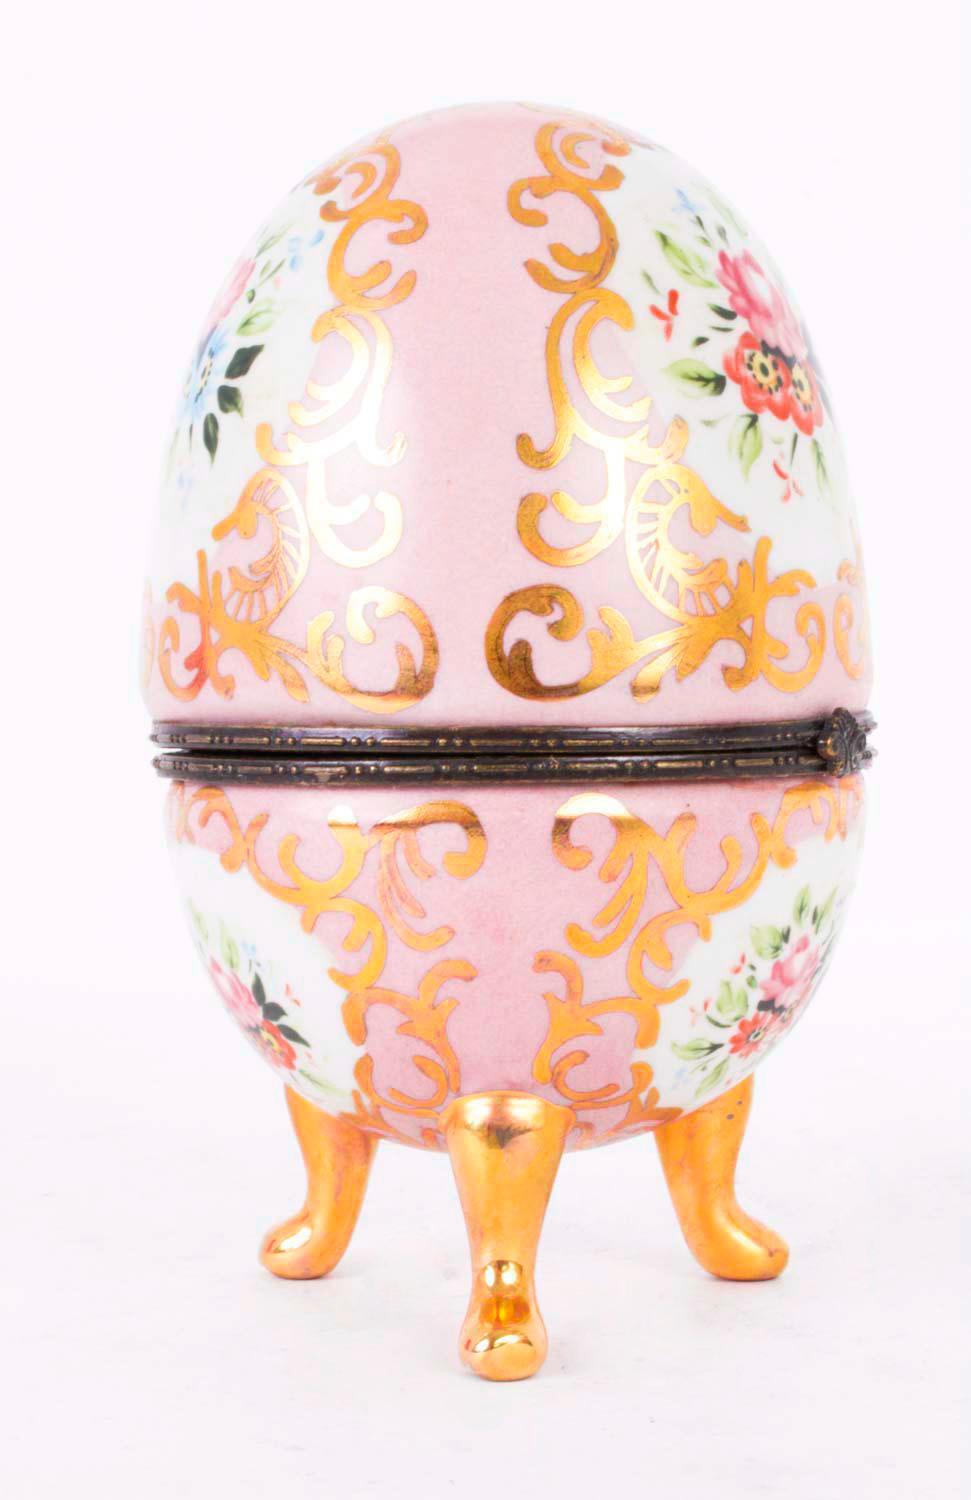 This is a stunning hand painted rose pink porcelain egg with hand painted floral decoration, applied gilding and ormolu mounts in the manner of Dresden, dating from the last quarter of the 20th century.

The egg stands on three gilded legs and